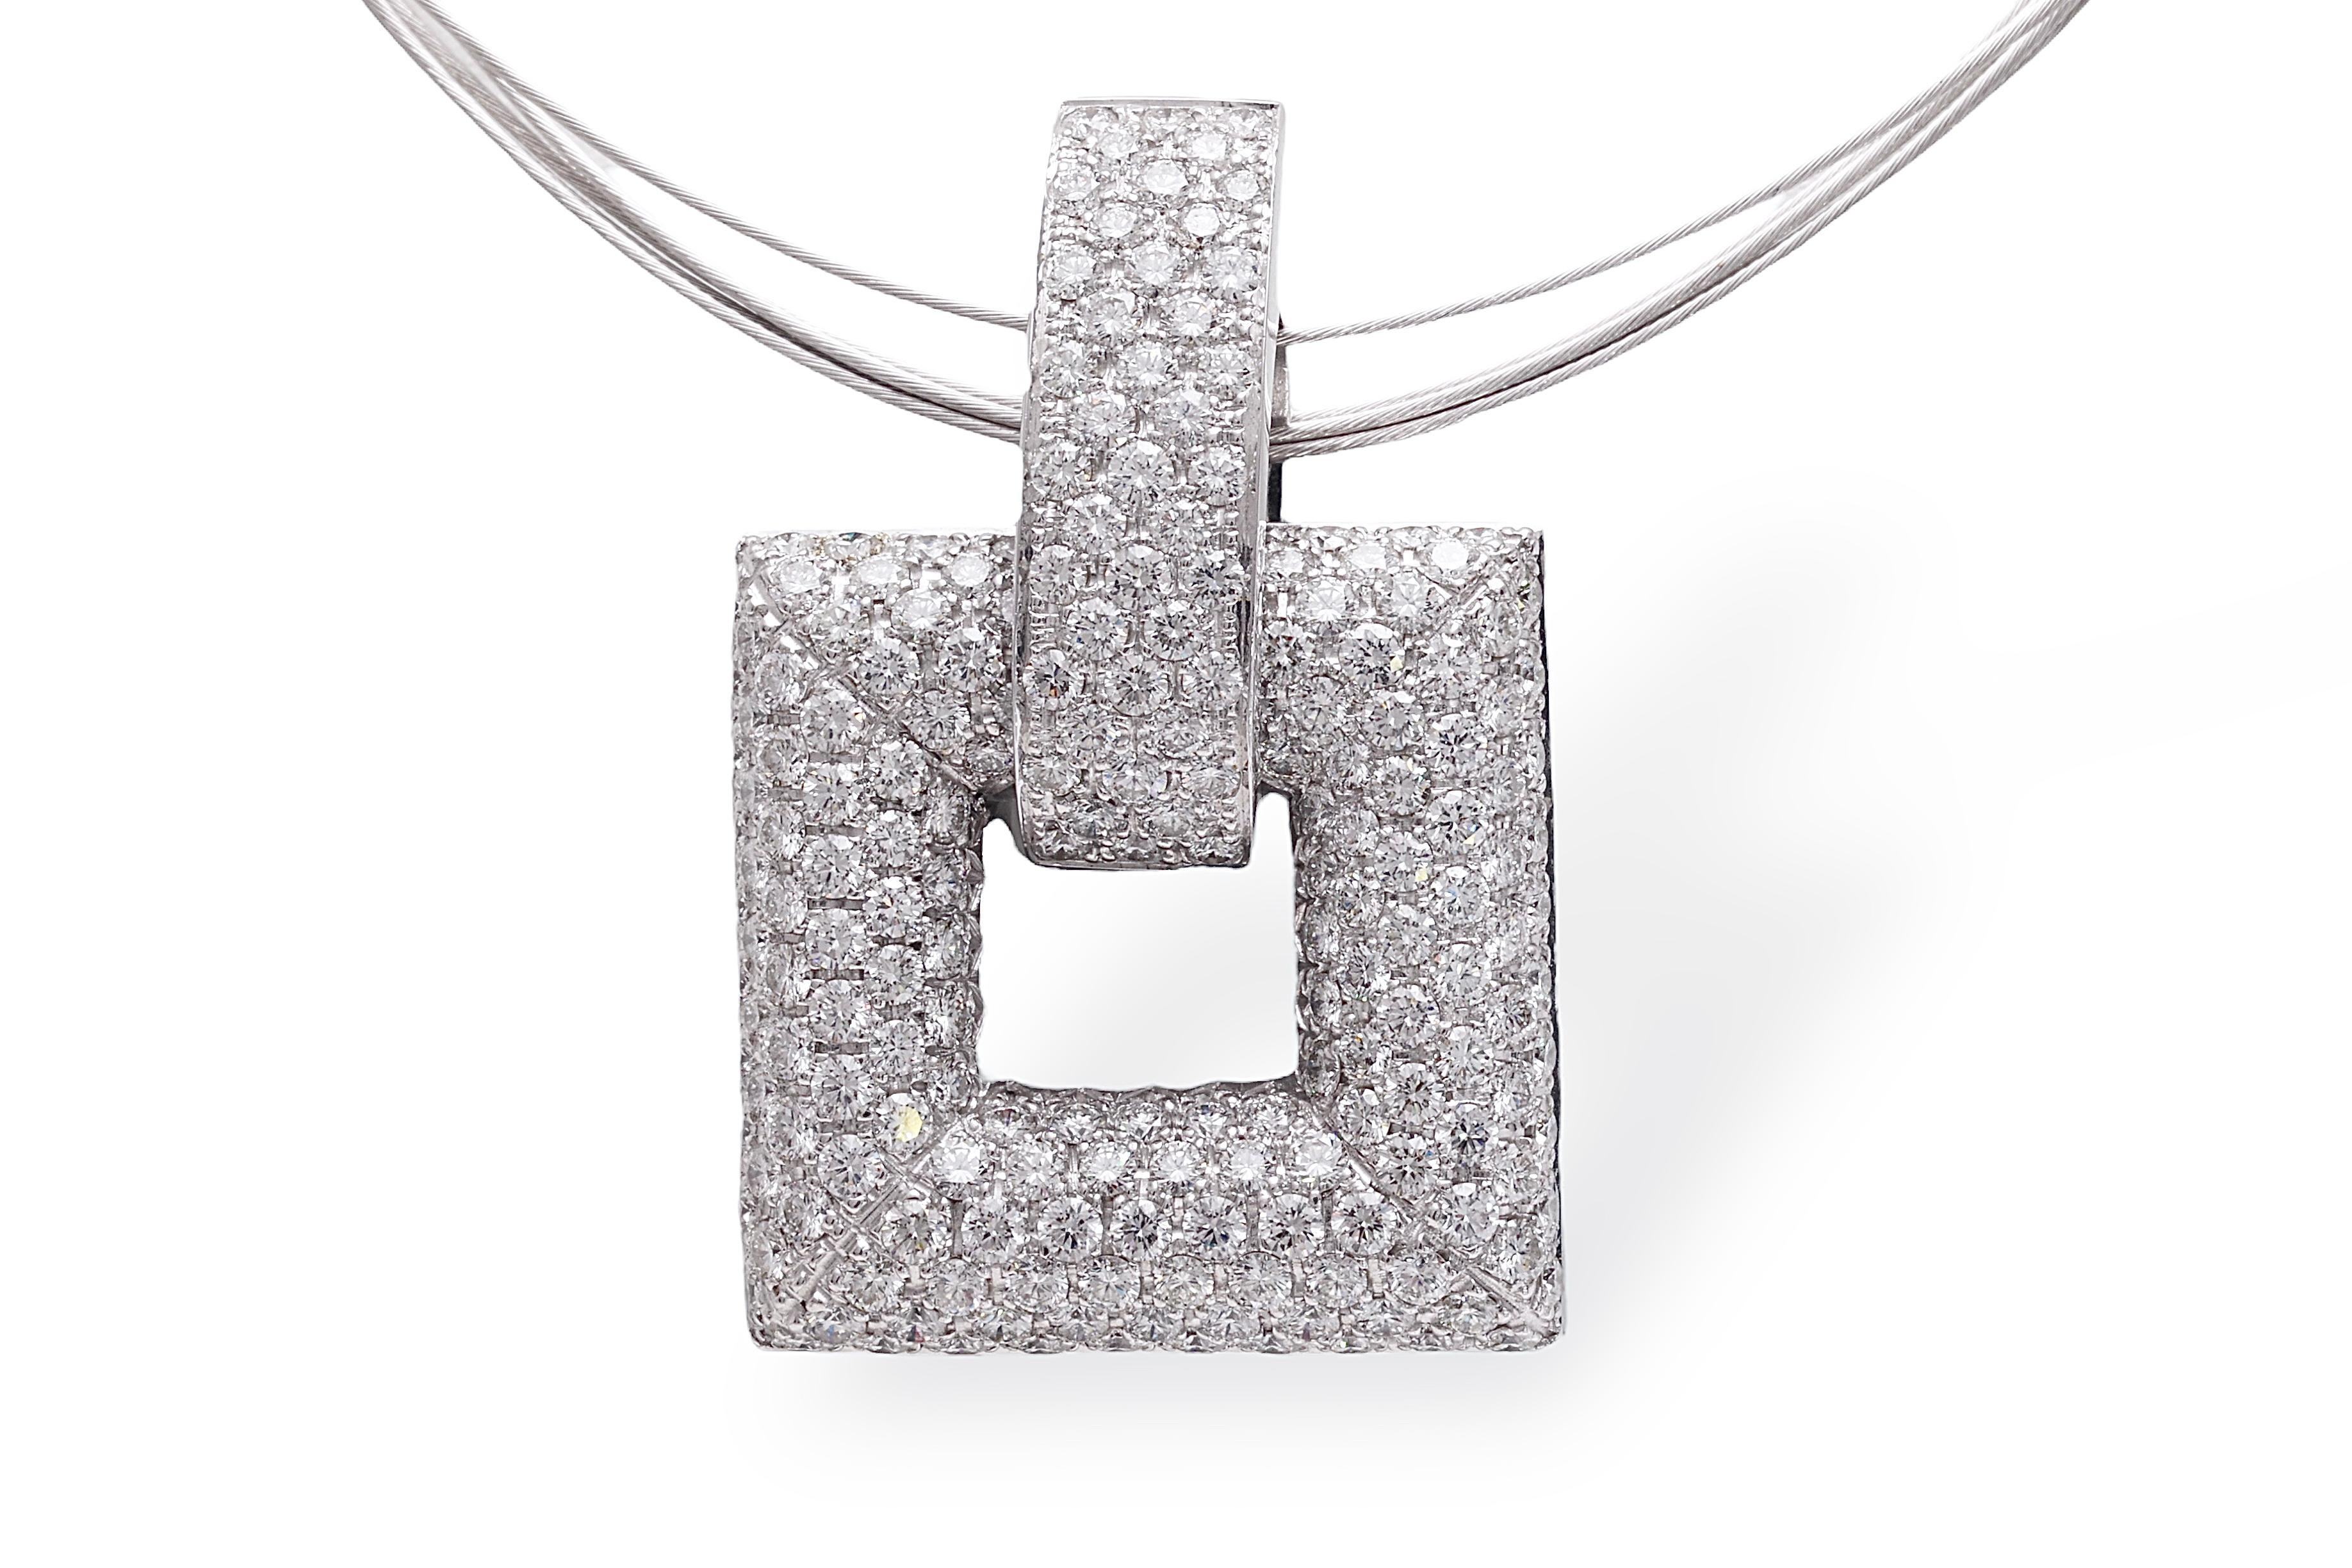 18 kt white gold Pendant with 5.75 ct. Diamonds, 18kt Gold Multi strand Necklace